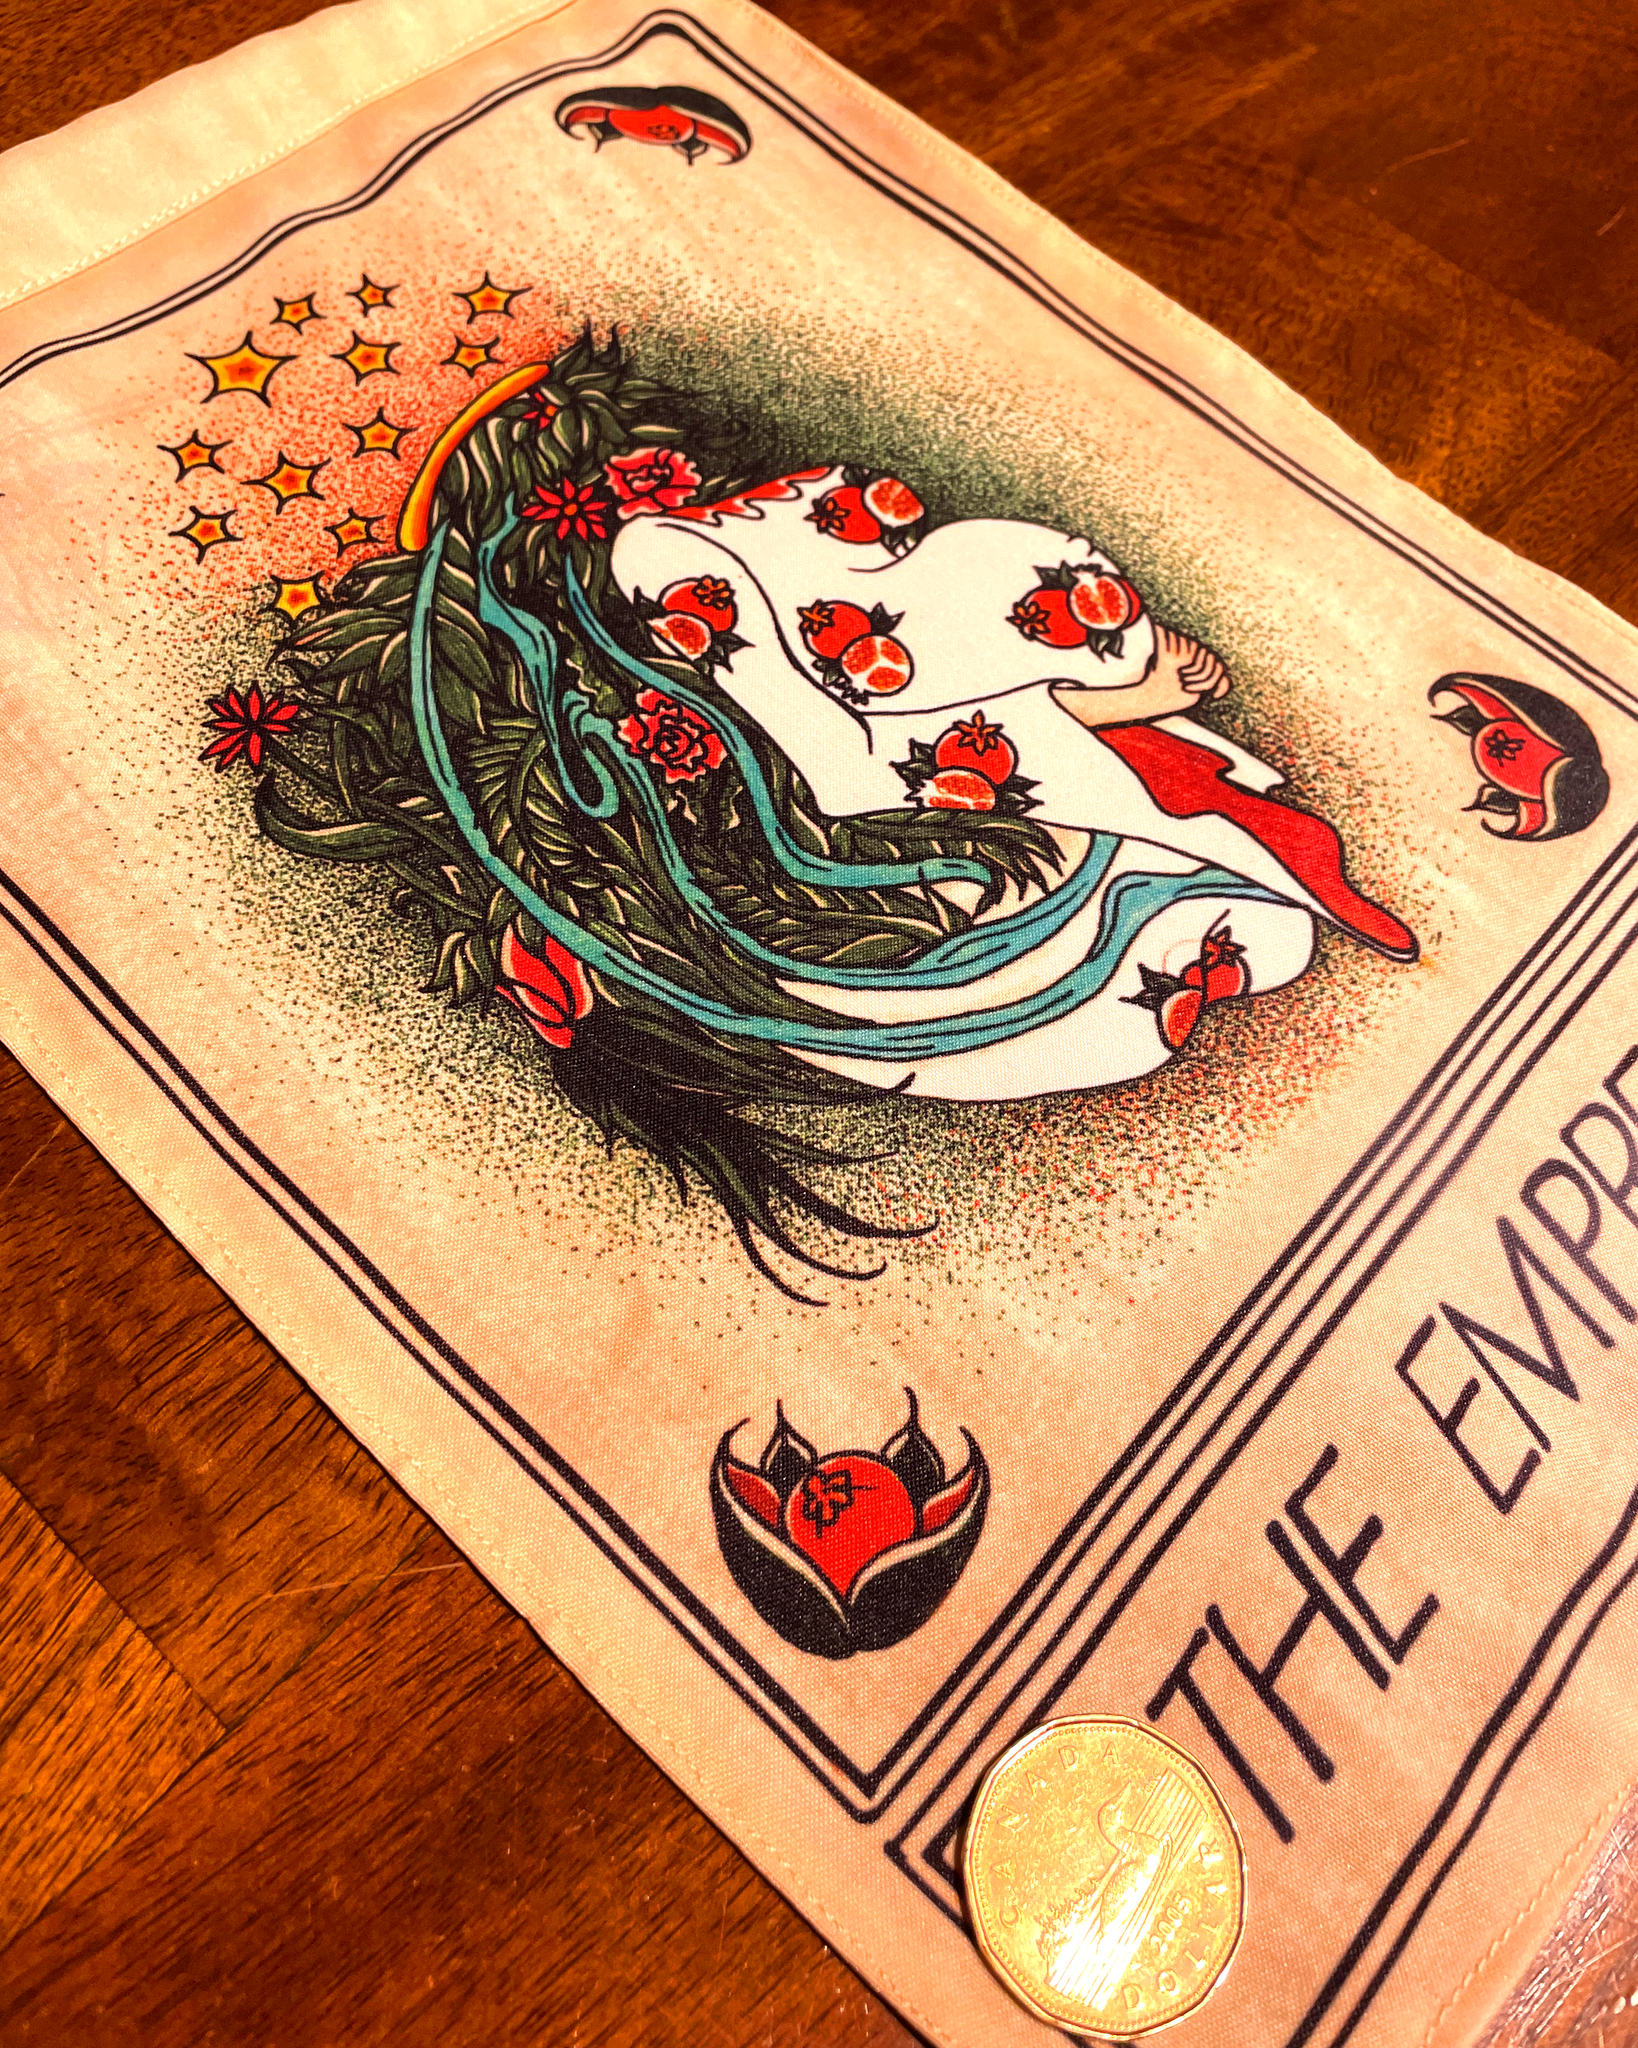 The Empress Card - Tapestry (7.75X11")